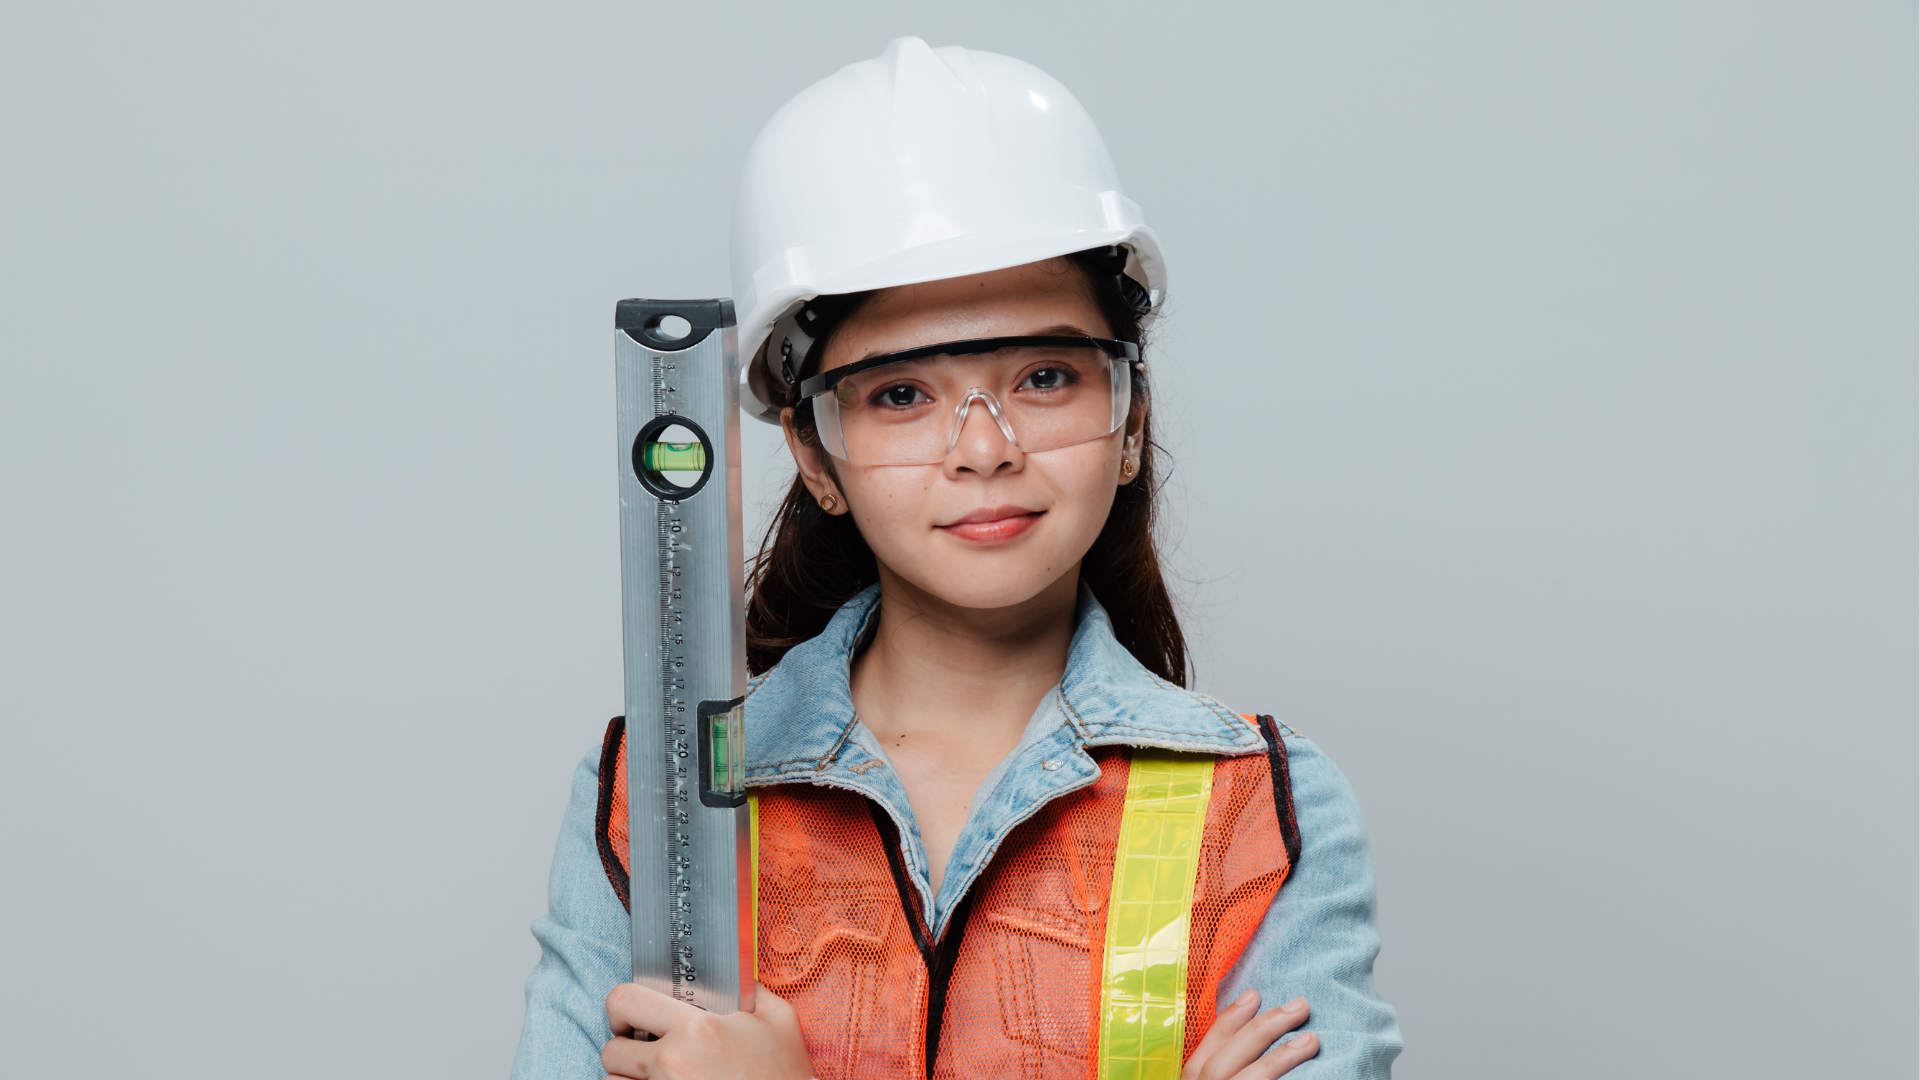 Which Engineering Professions are Regulated in the Philippines?